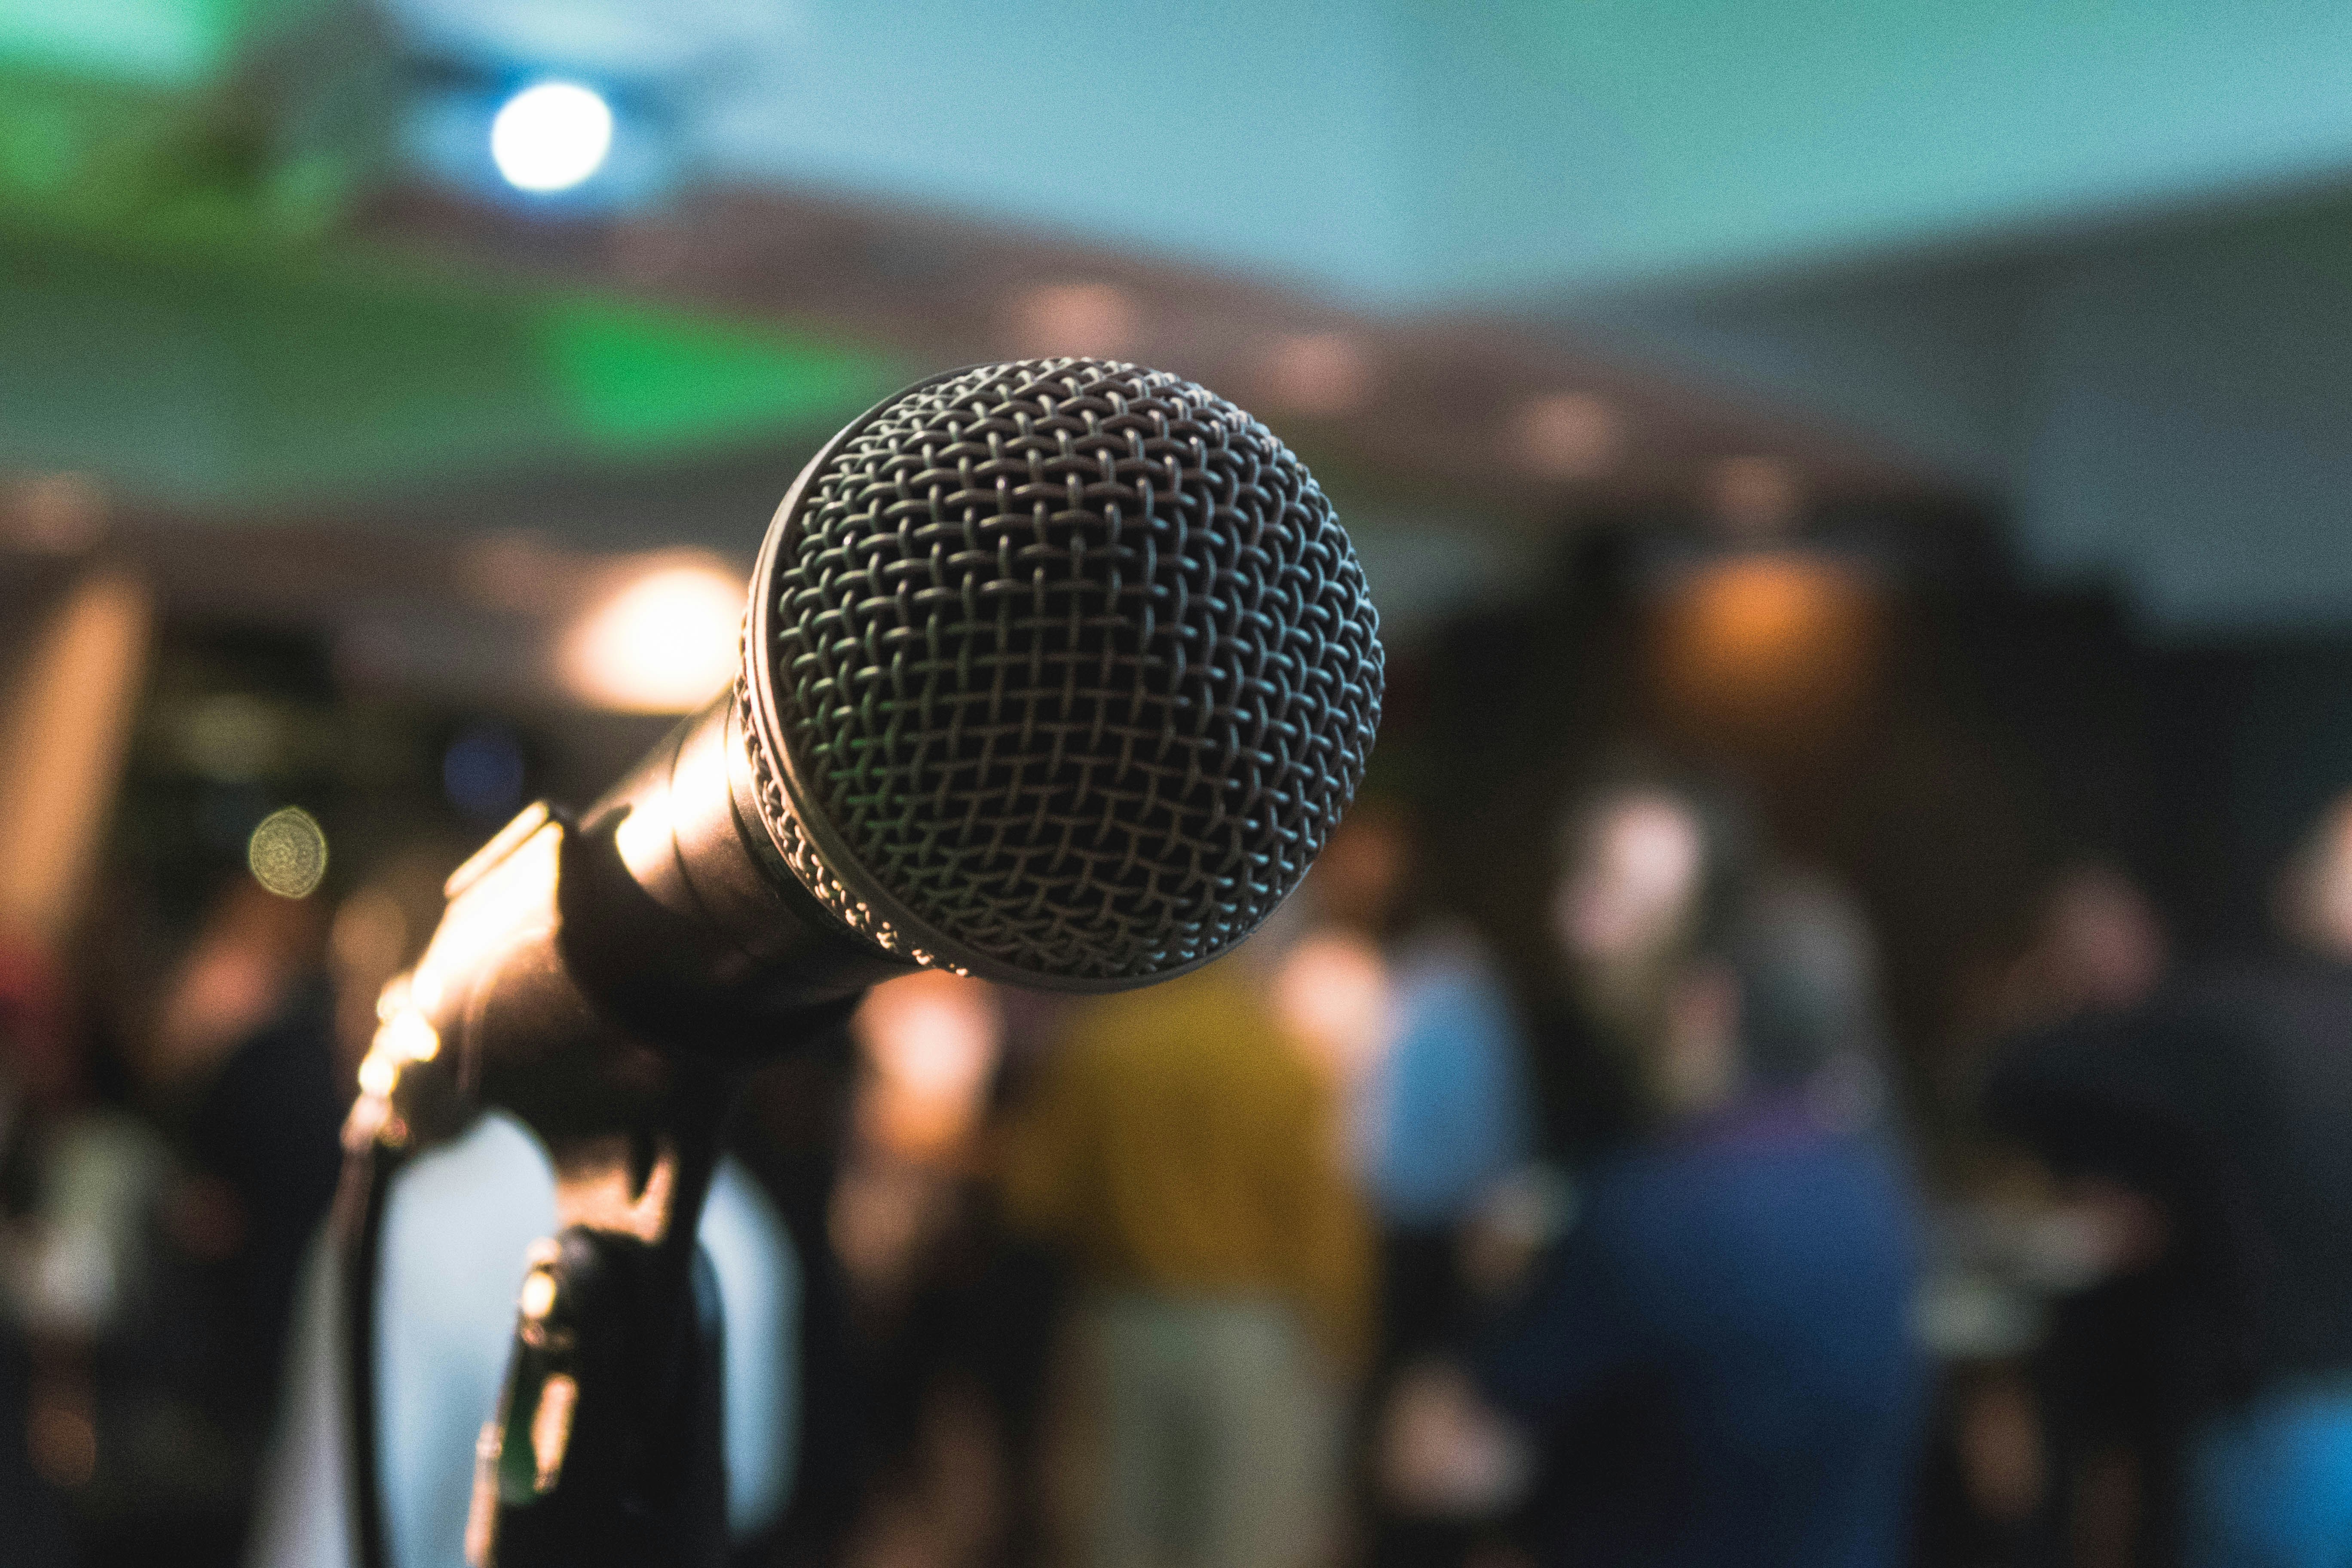 Photograph of a microphone, seemingly set up at a podium ahead of a speech